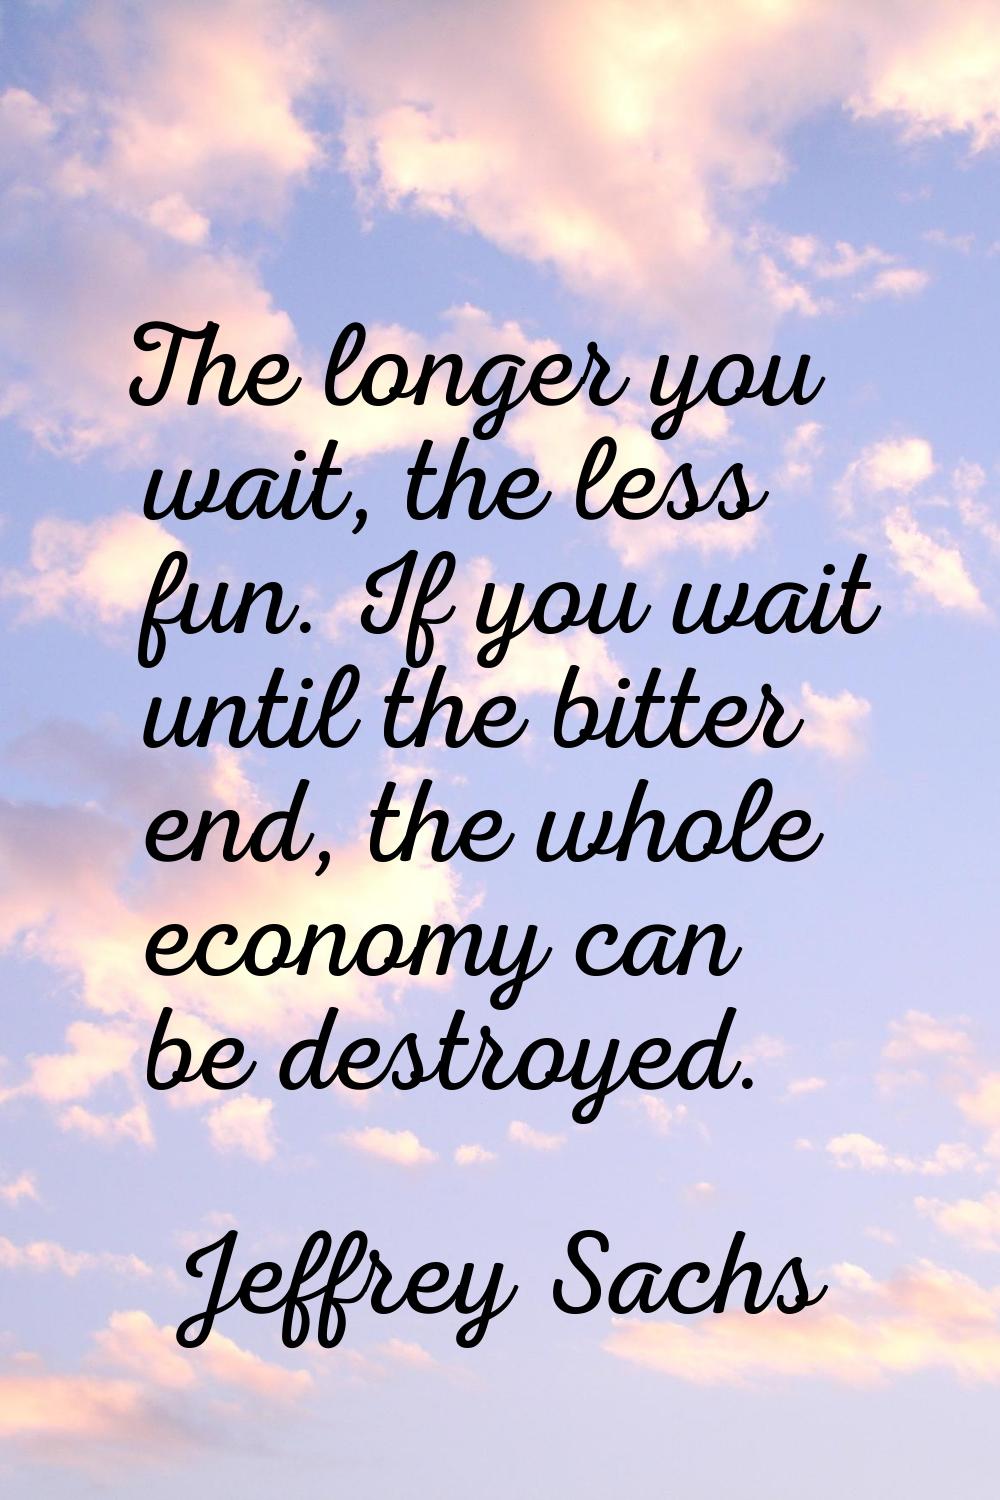 The longer you wait, the less fun. If you wait until the bitter end, the whole economy can be destr